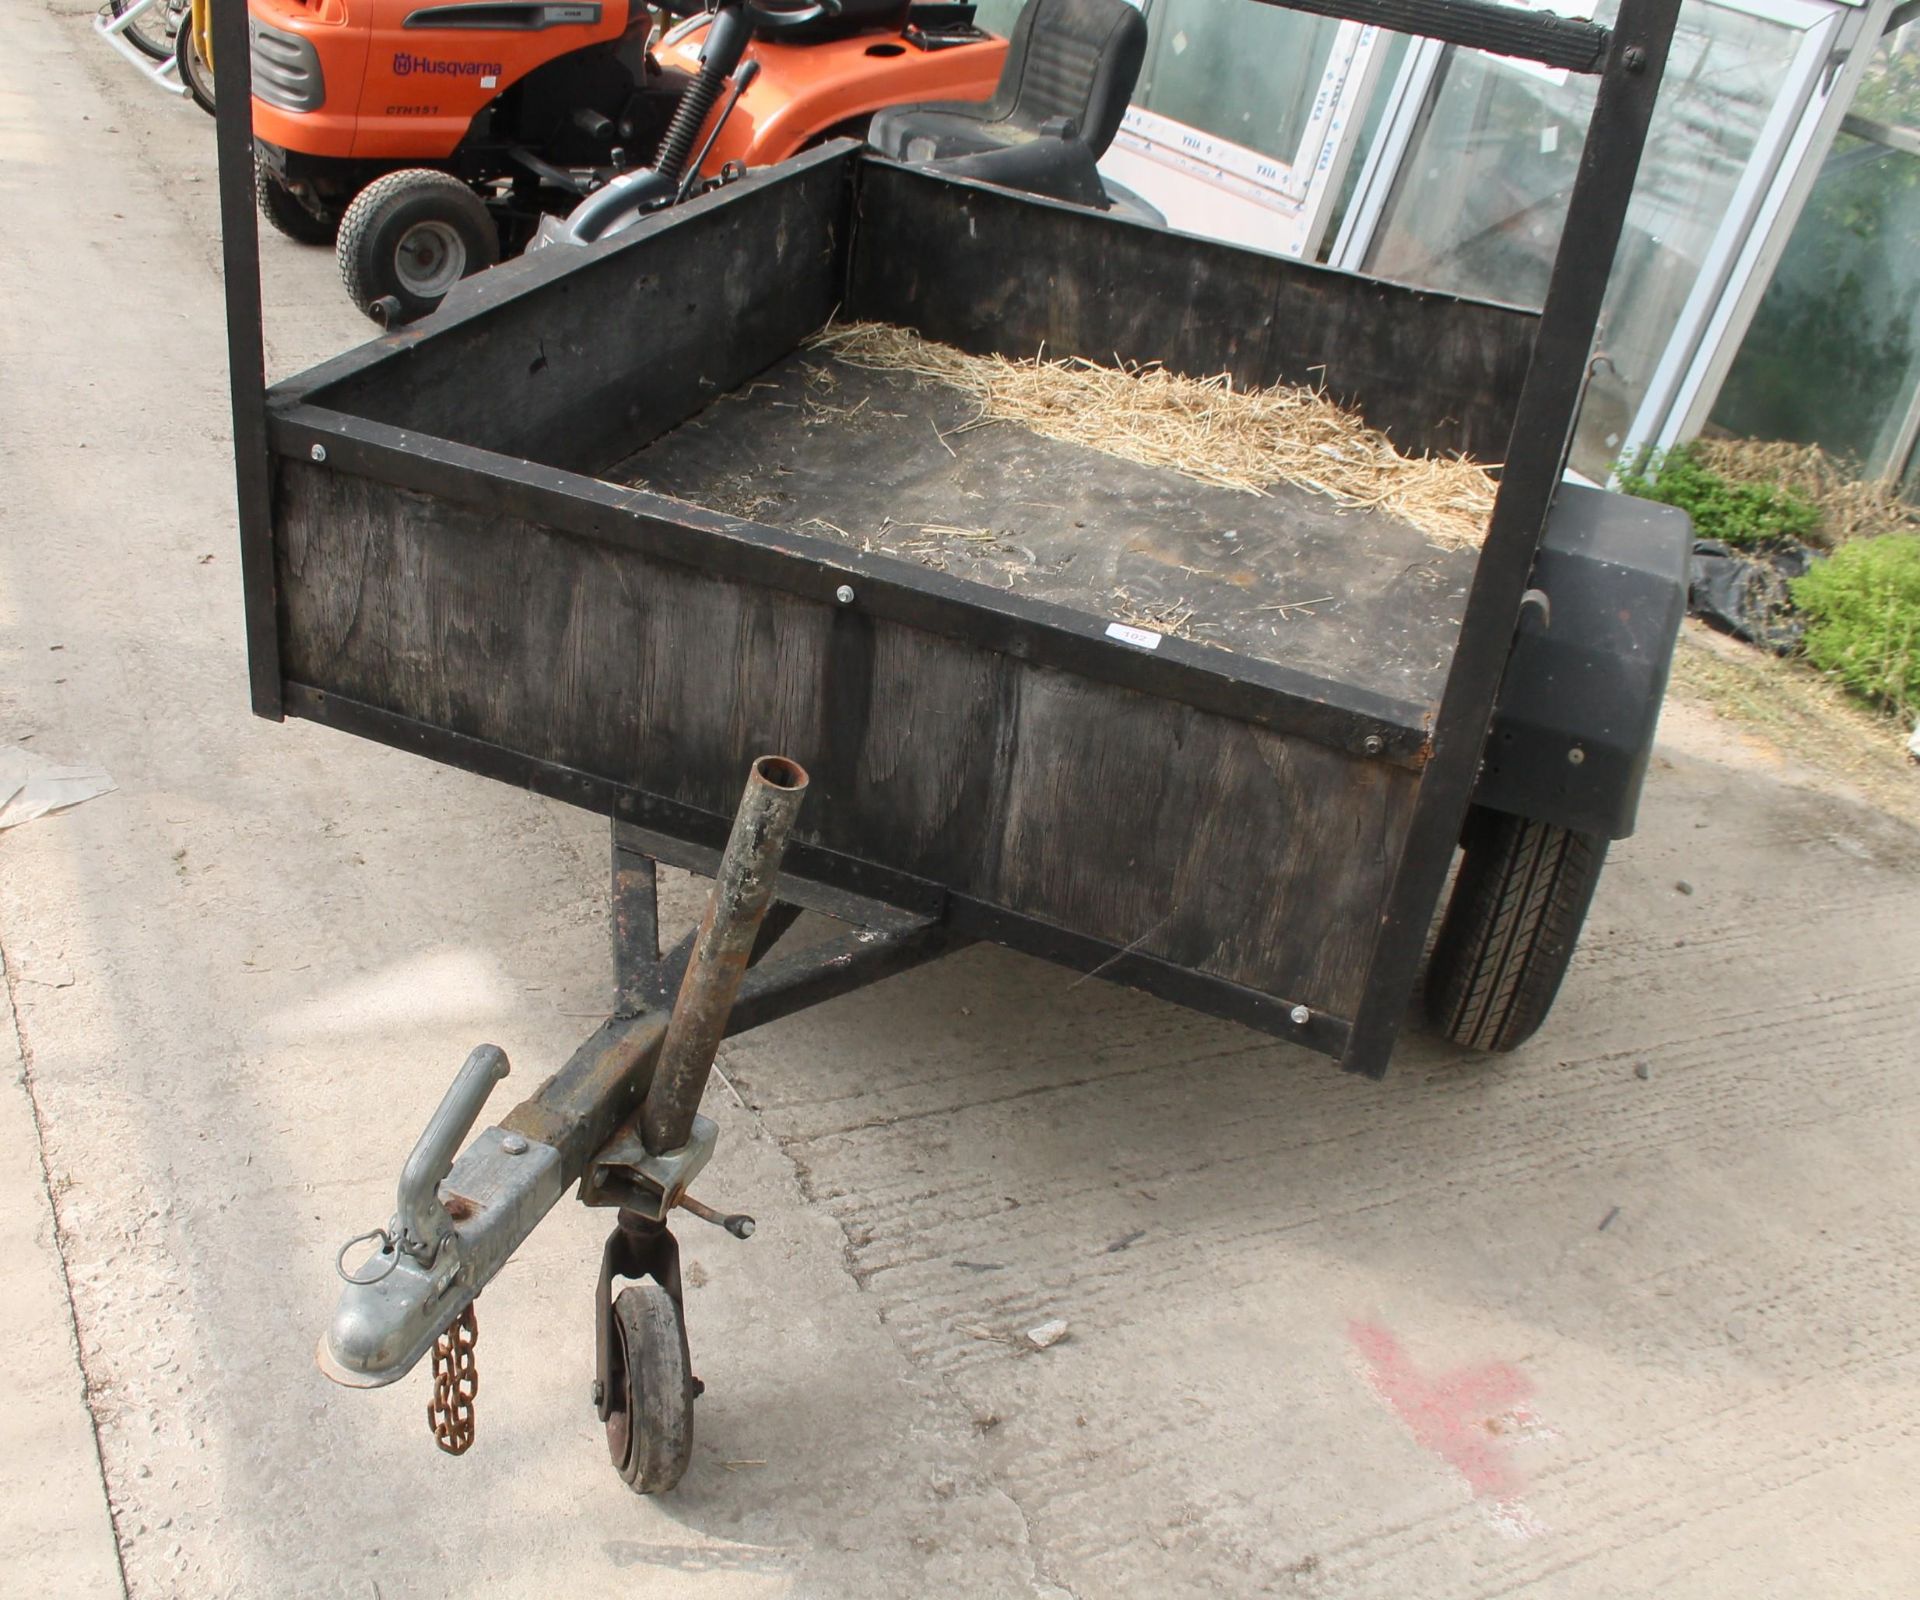 A SINGLE AXLE METAL AND WOODEN SIDED CAR TRAILER WITH FRONT THRIPPER (149CM x 122CM) NO VAT - Image 2 of 3